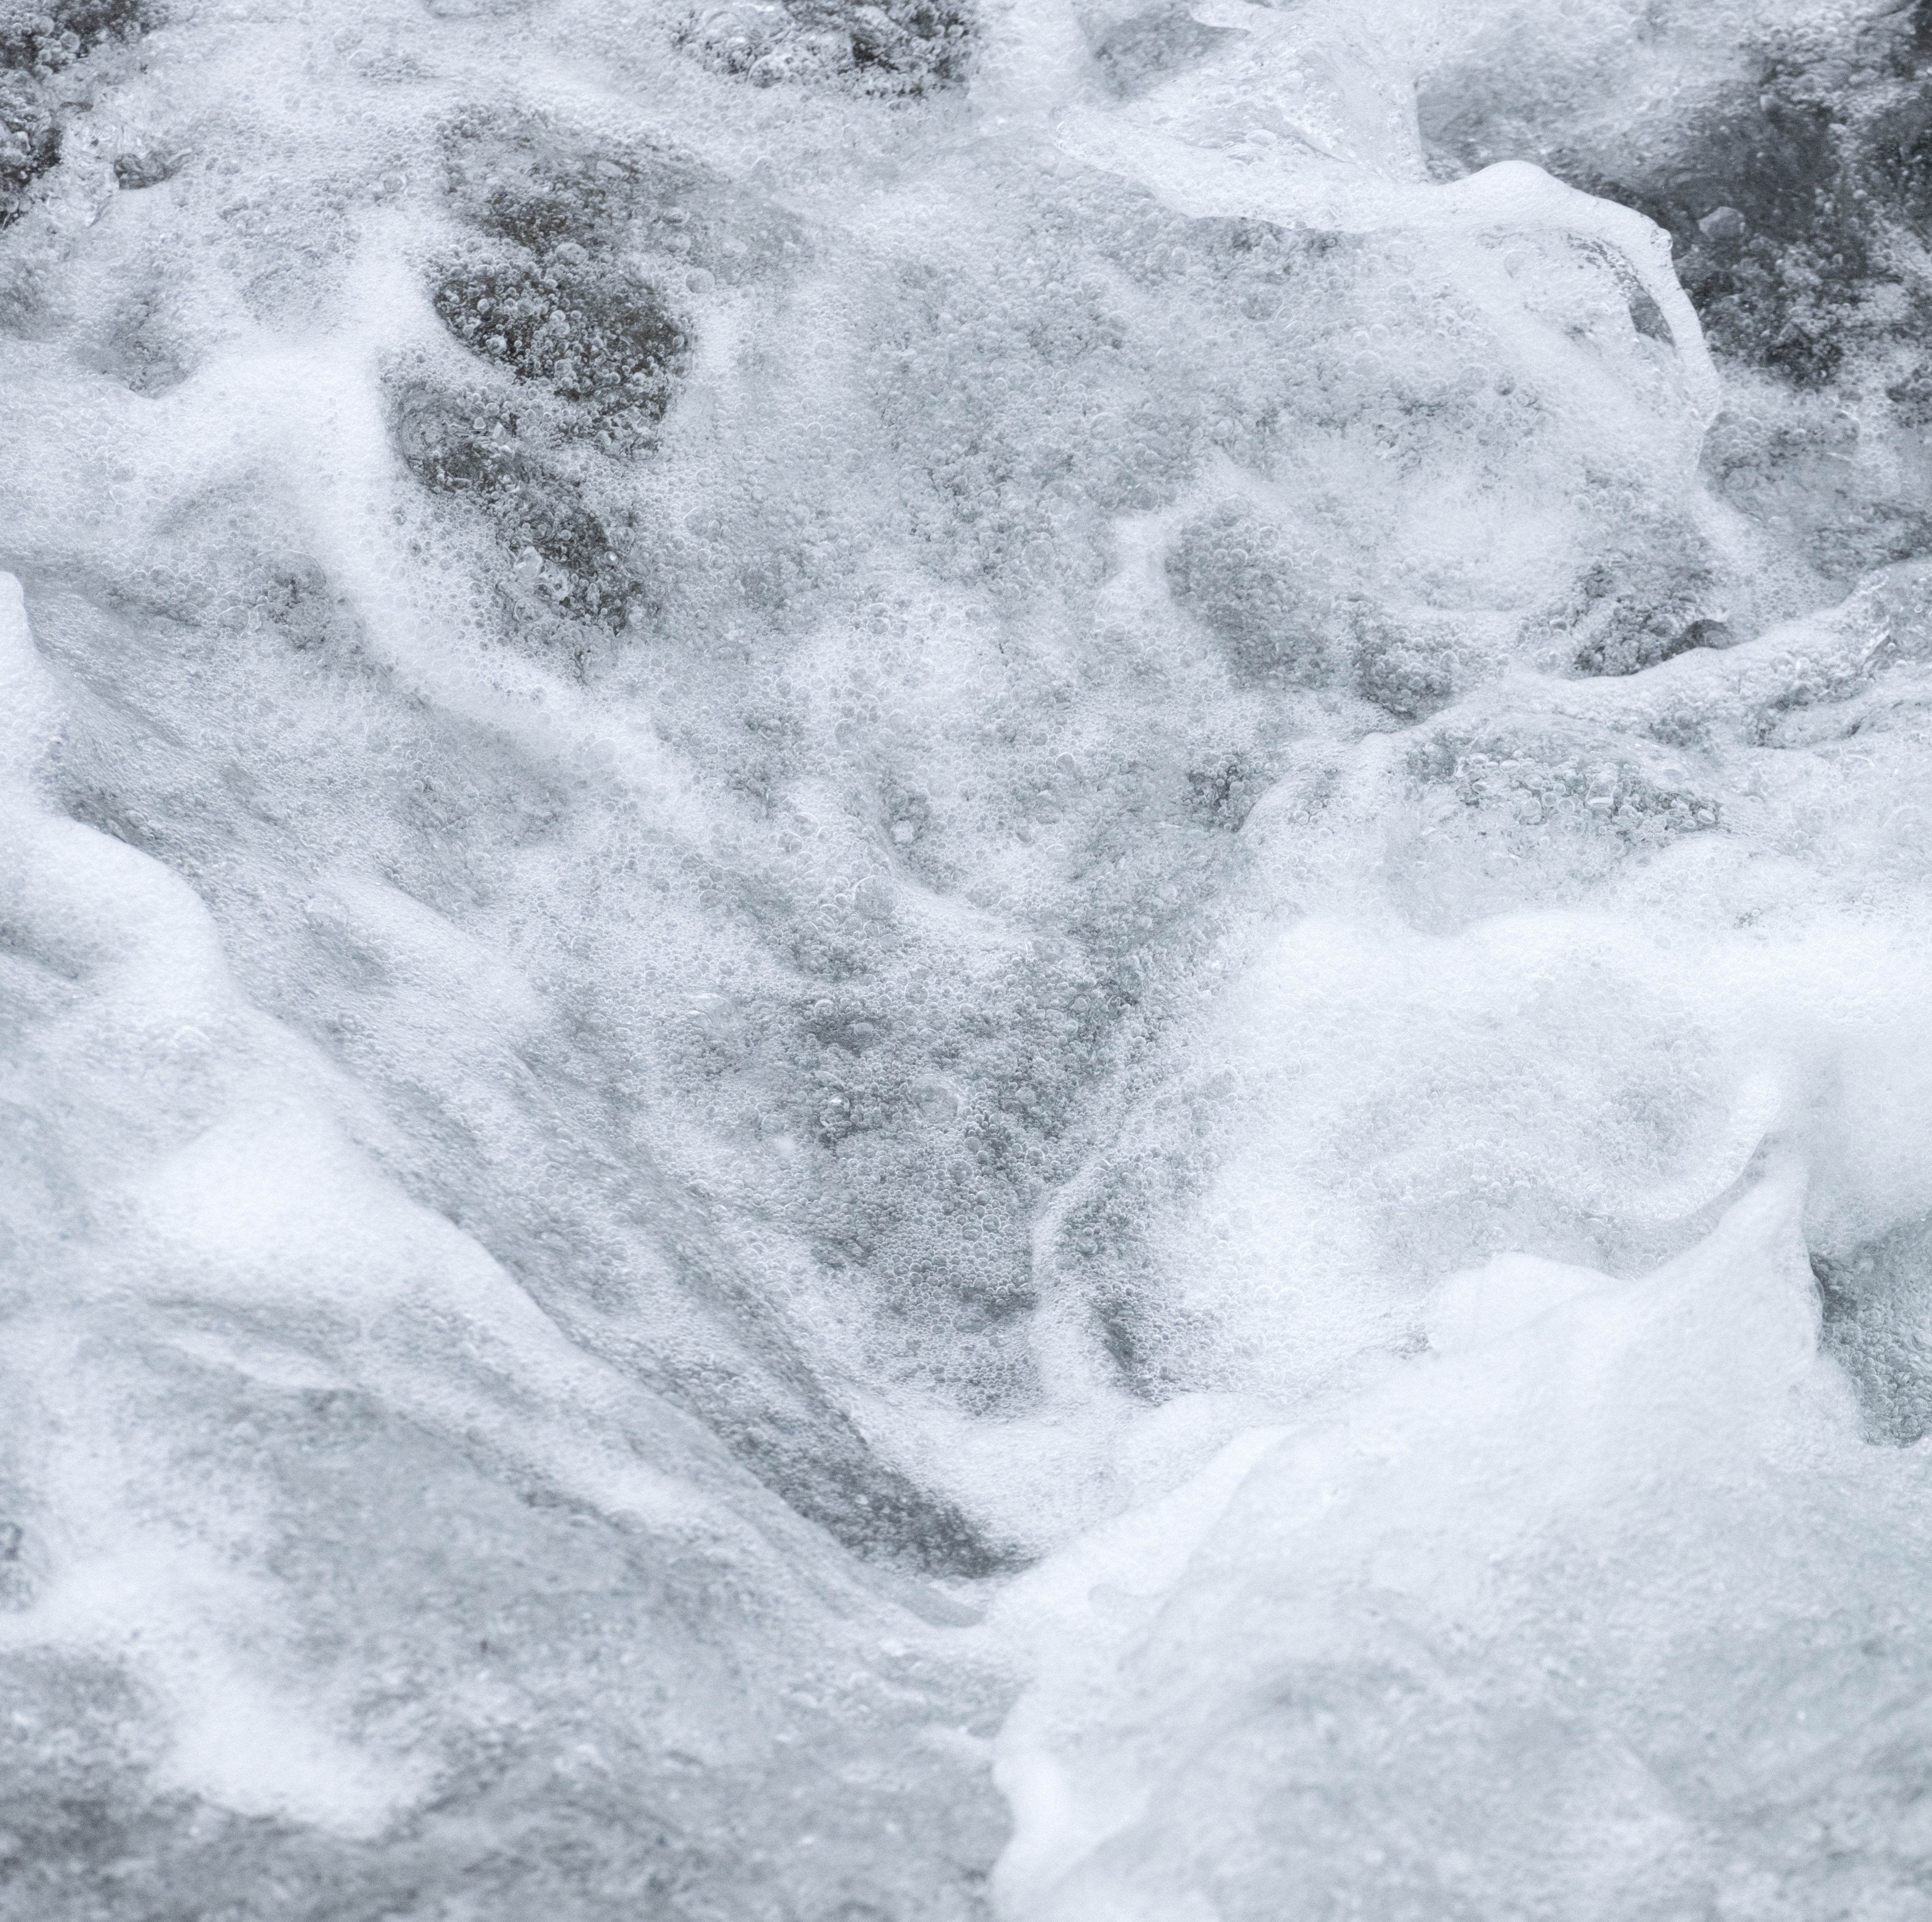 Image of swirly and foaming water in a stream.